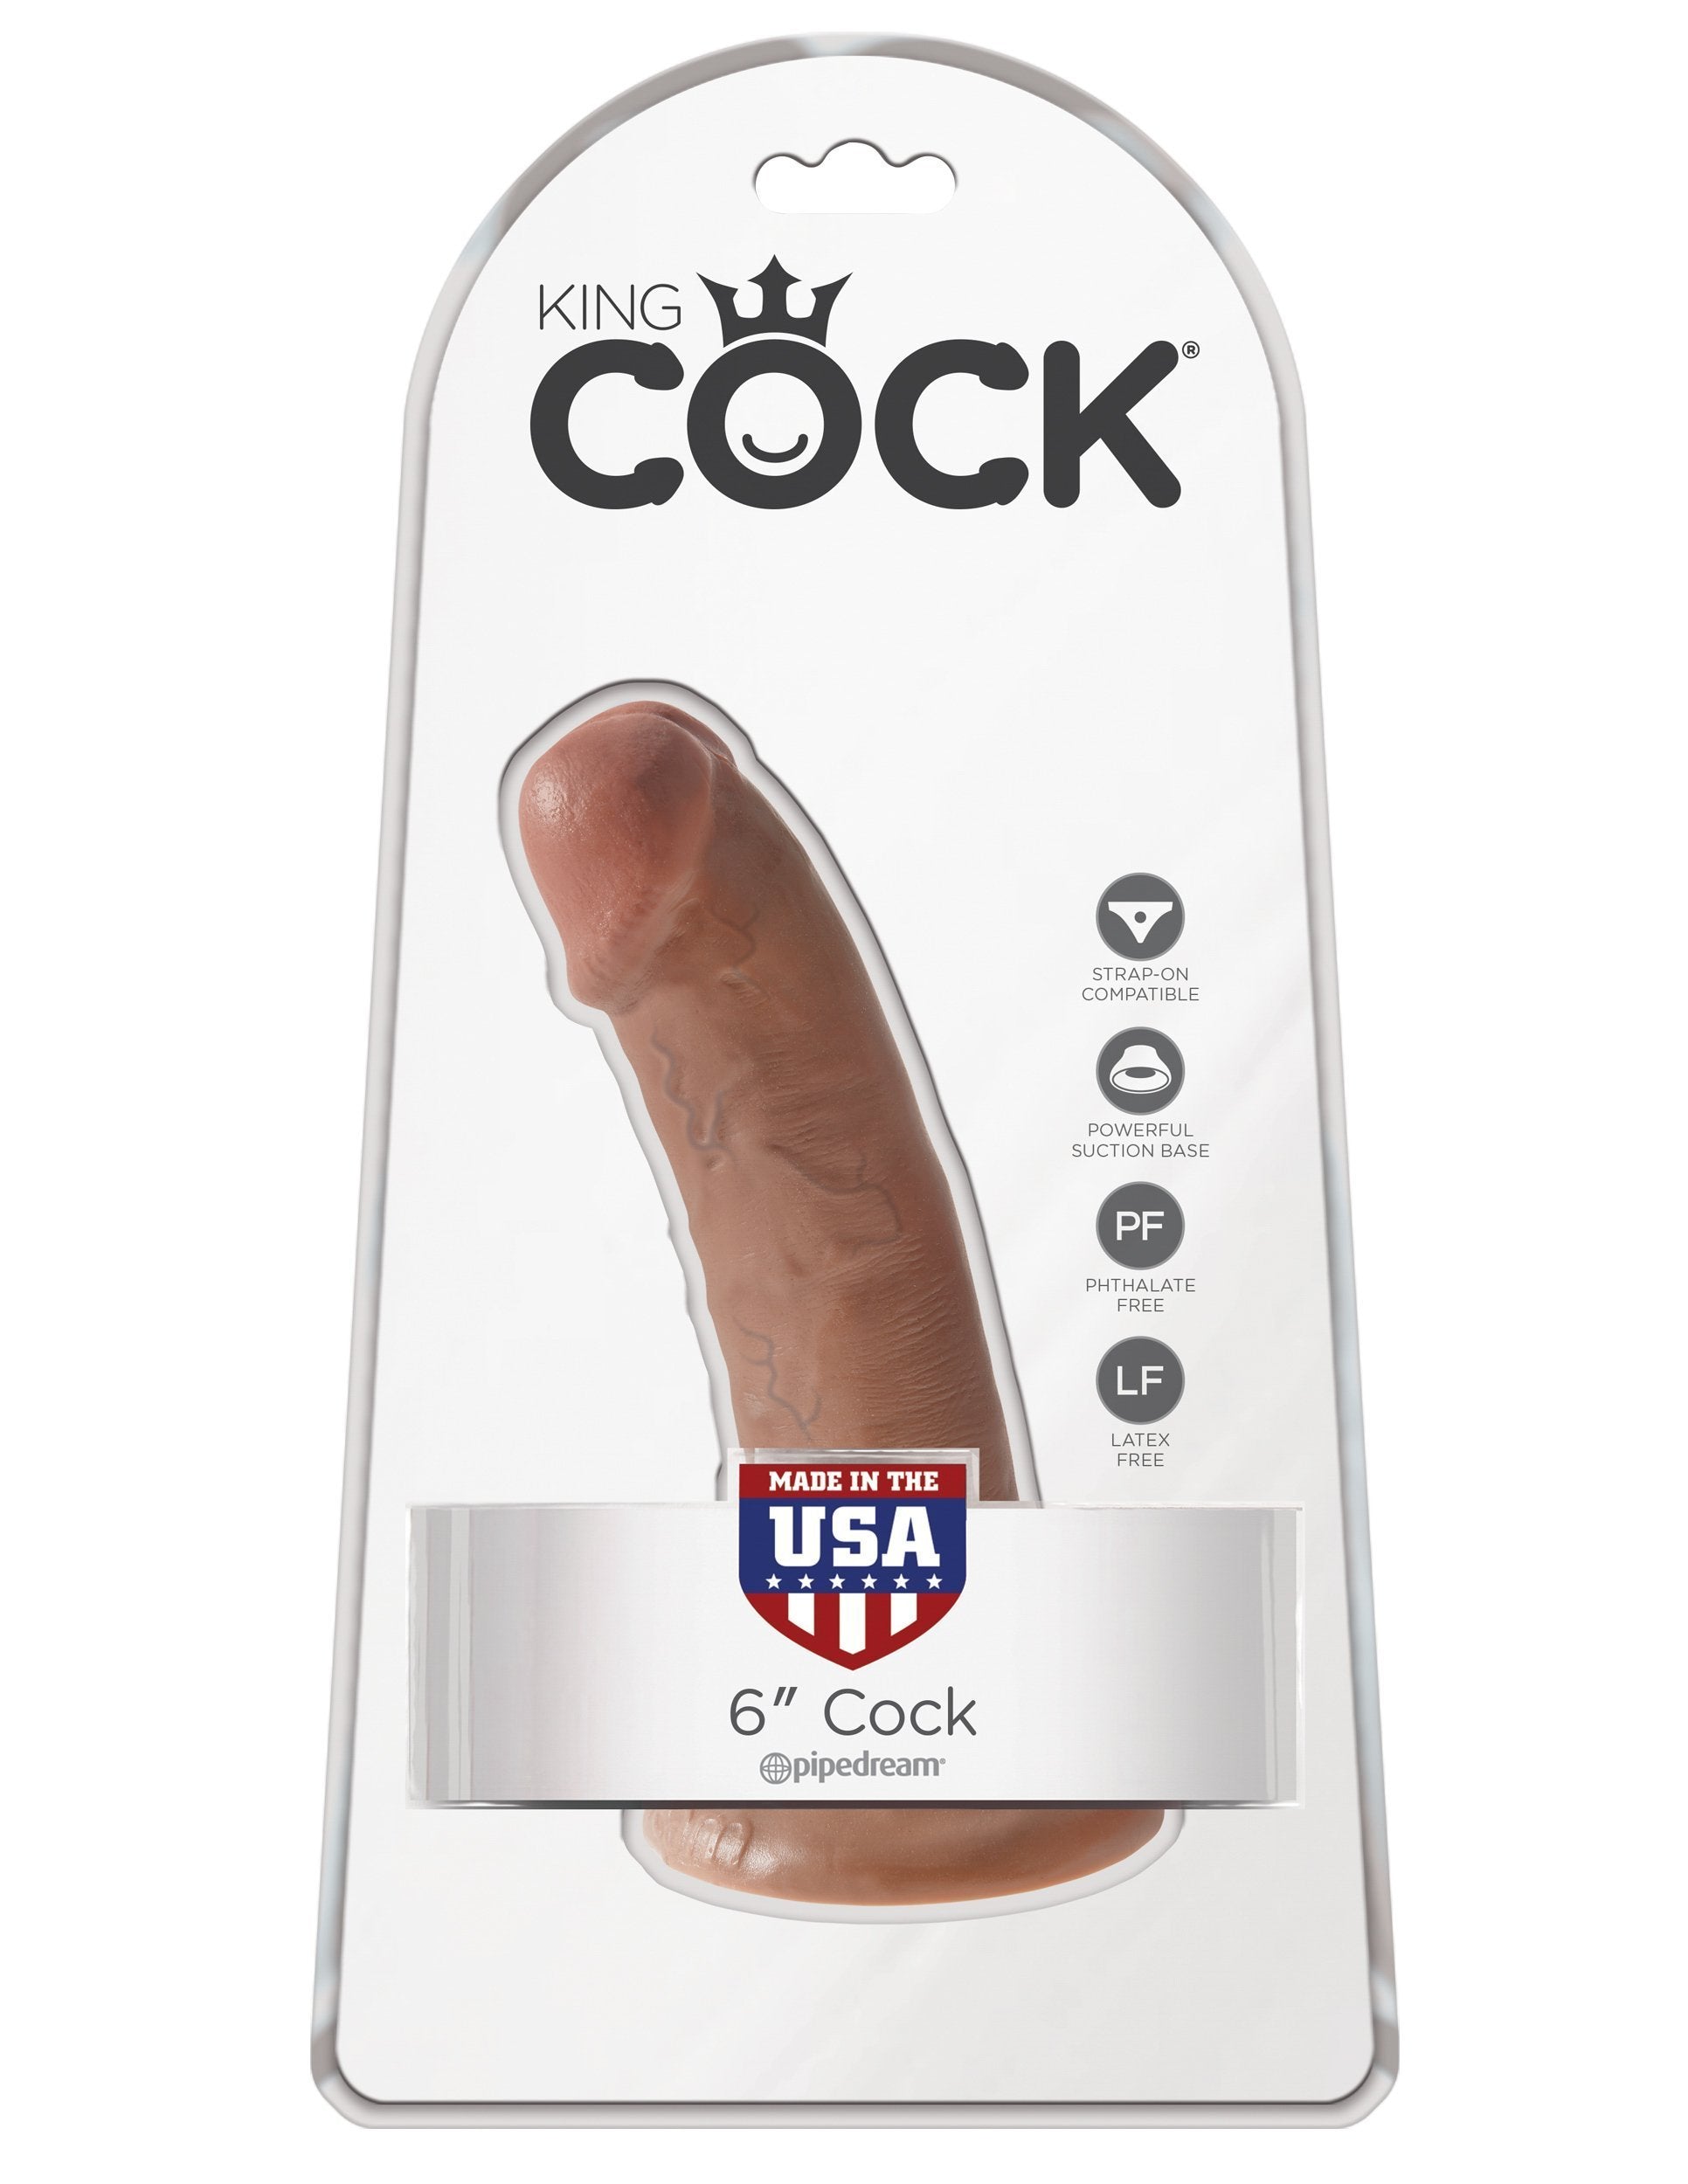 Pipedream - King Cock 6" Cock (Brown) Realistic Dildo with suction cup (Non Vibration) Singapore